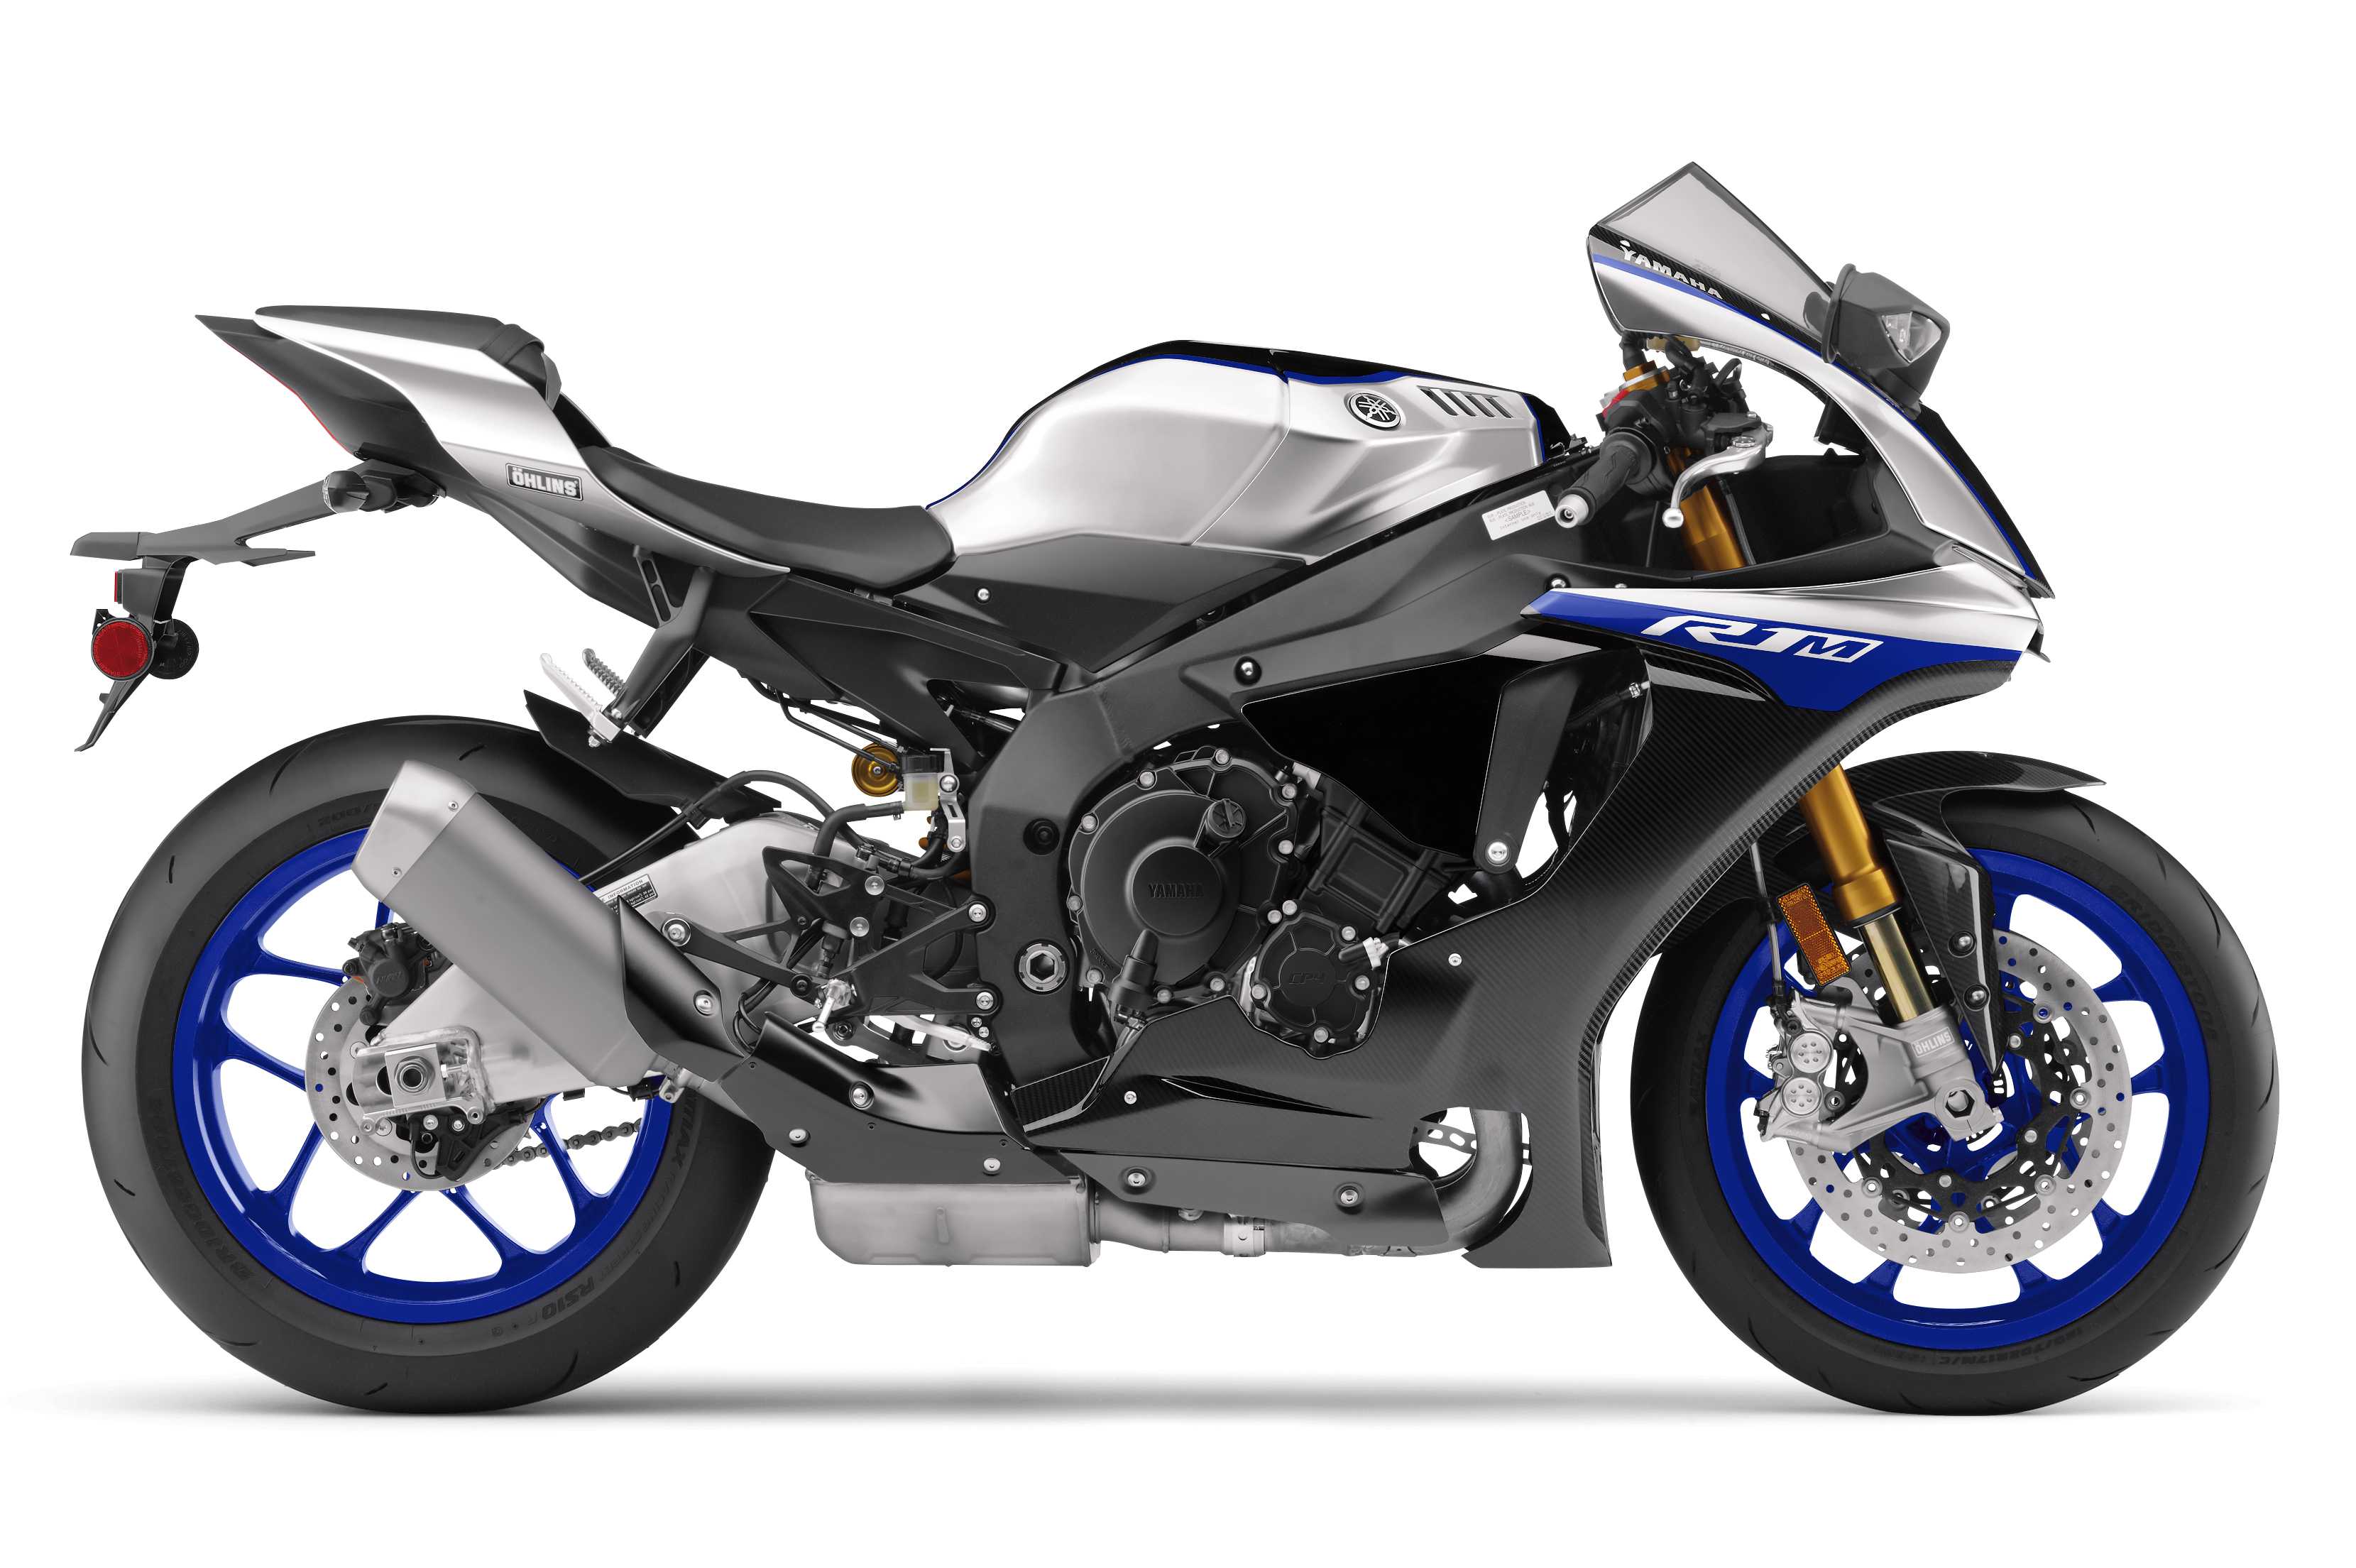 Yamaha Adds Clutchless Downshifting Feature To 2018 YZF-R1 And YZF-R1M